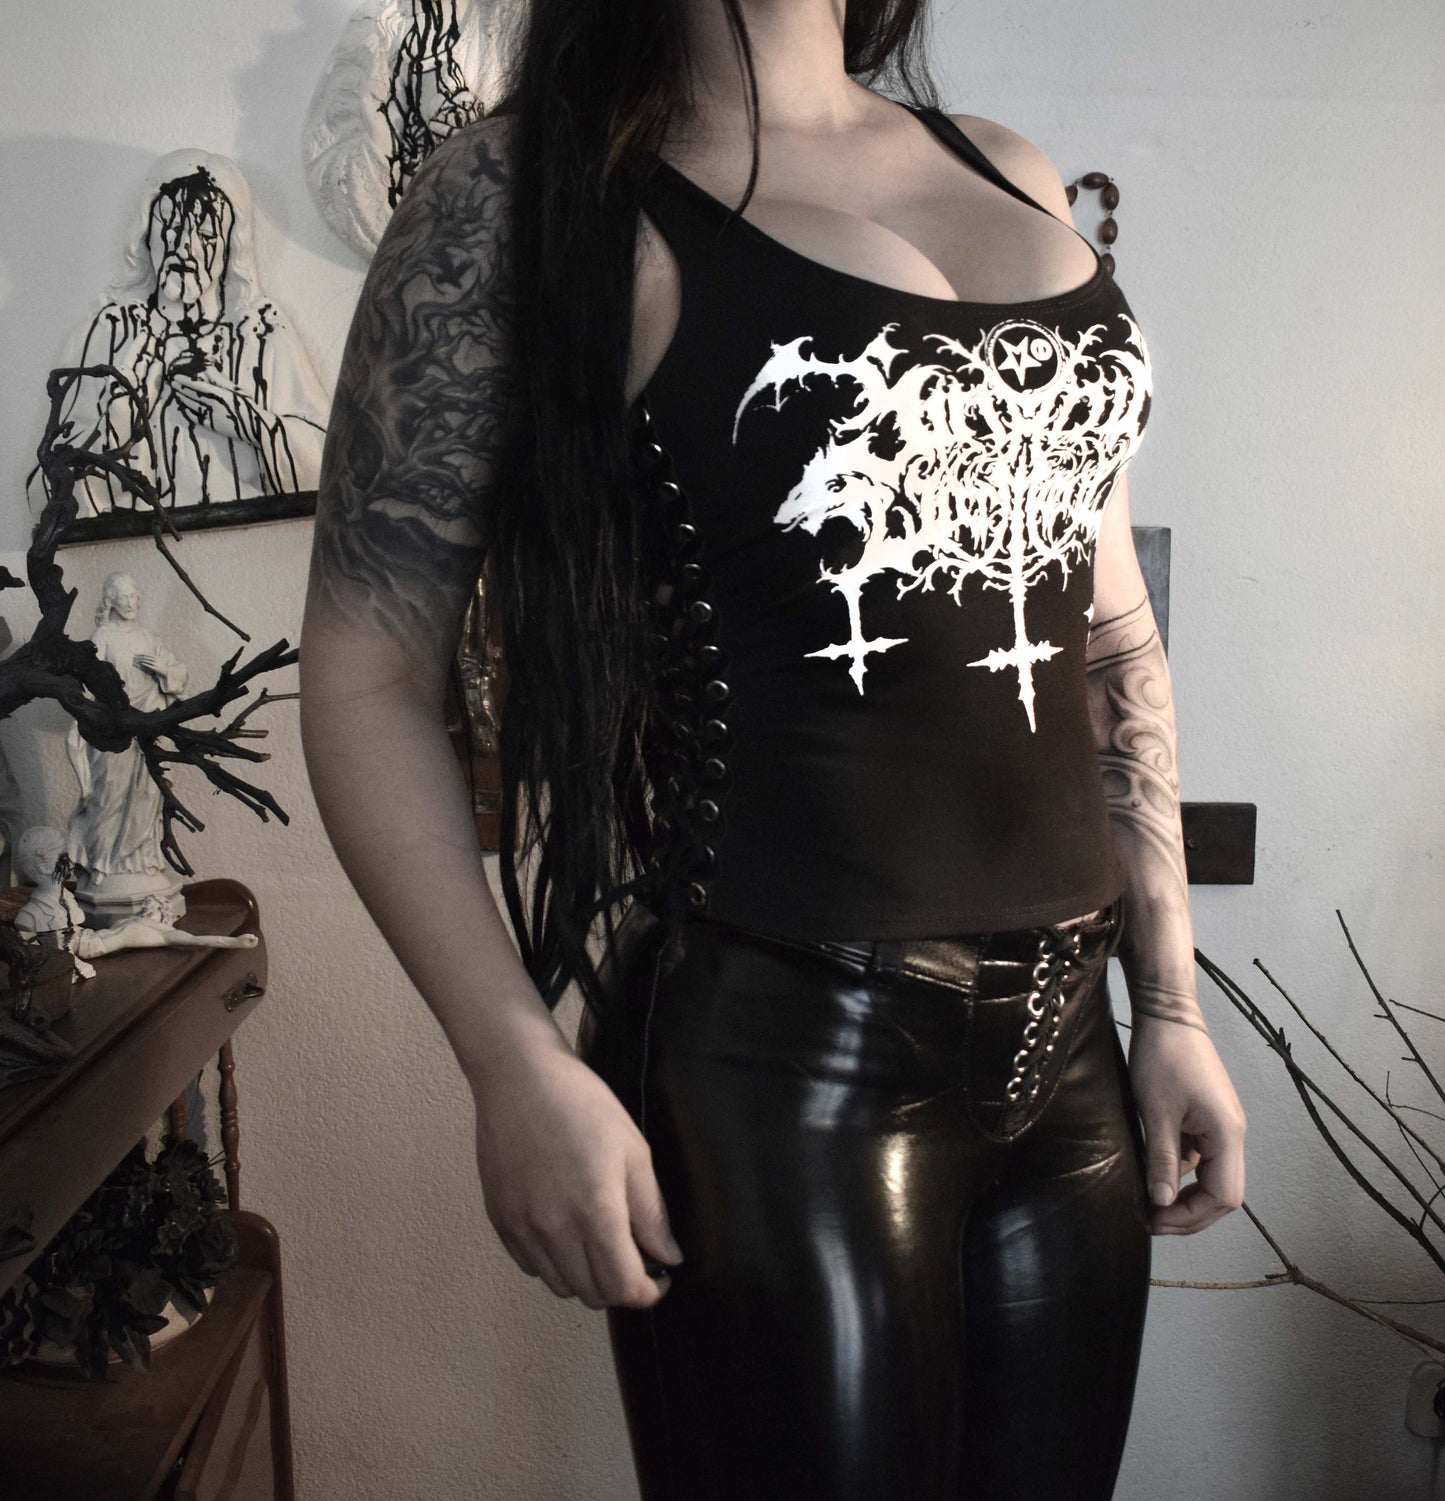 Satanic Warmaster (not official ) ⇹ Lace-up Side Tank Top ⇹ Black metal shirt